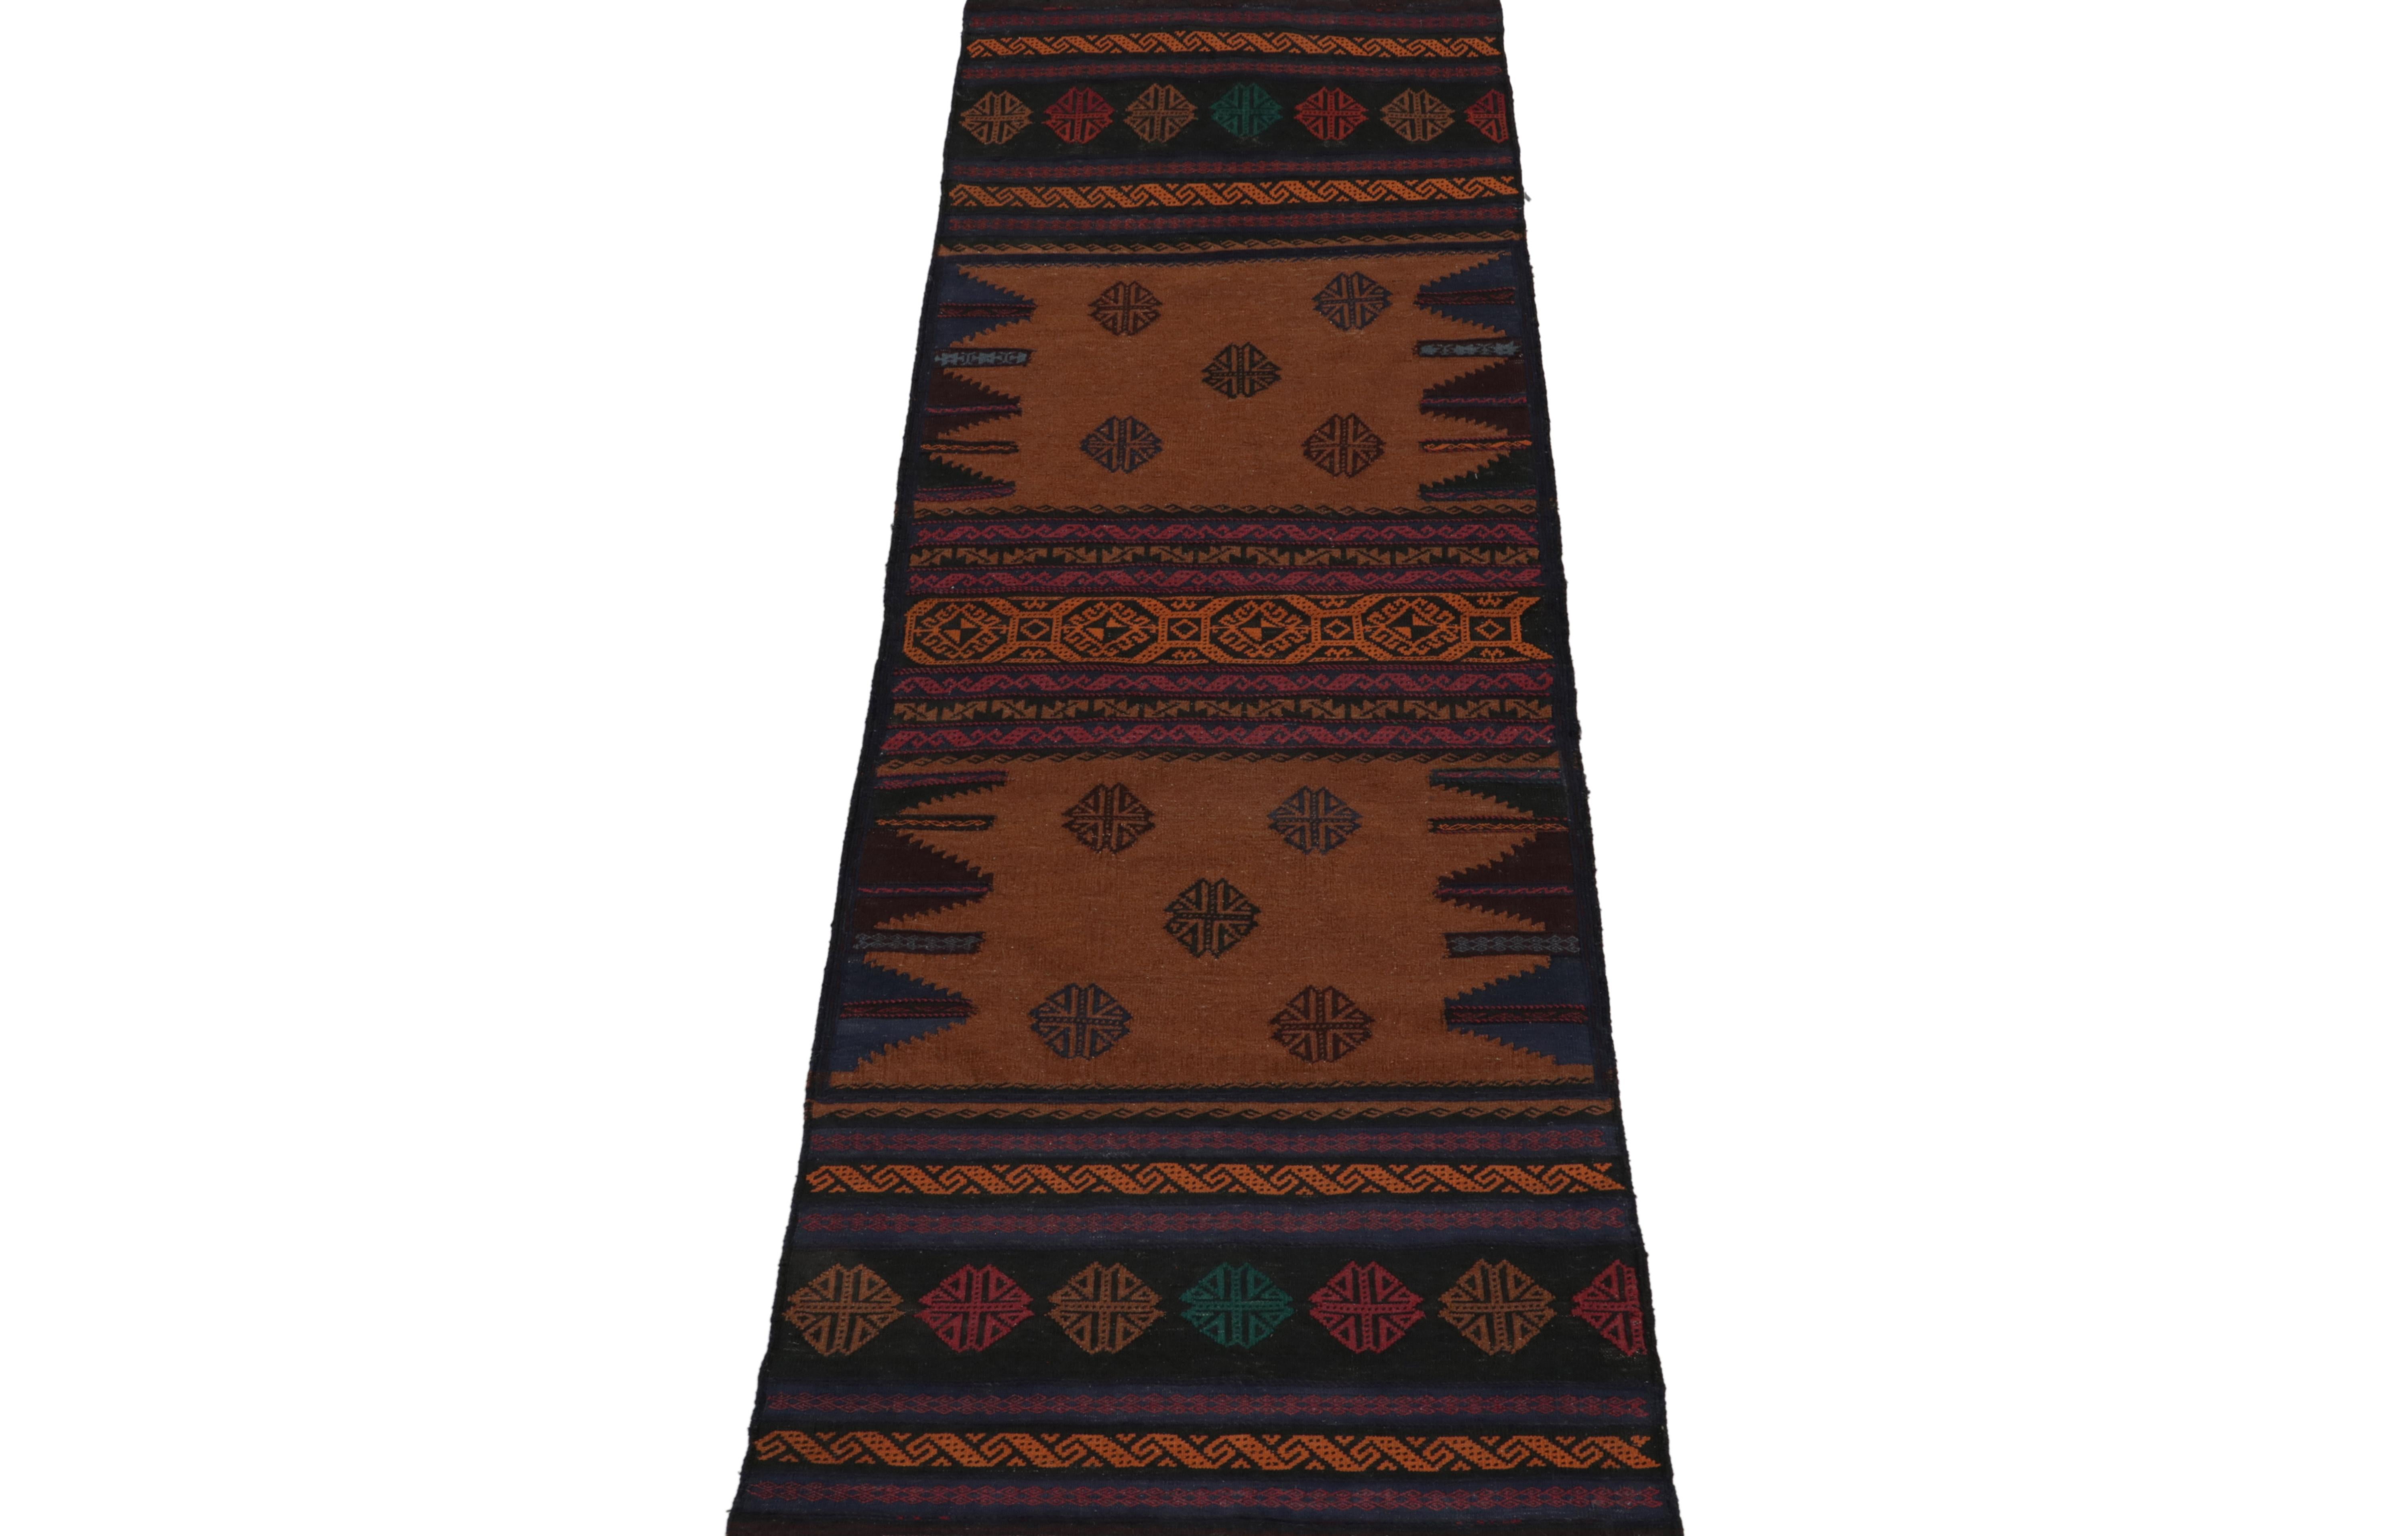 This vintage 3x8 Persian kilim is a unique tribal runner for its period, handwoven in wool circa 1950-1960.

Further on the Design:

The field enjoys patterns in an emphasis on brown, black, blue, red & orange variations - ultimately